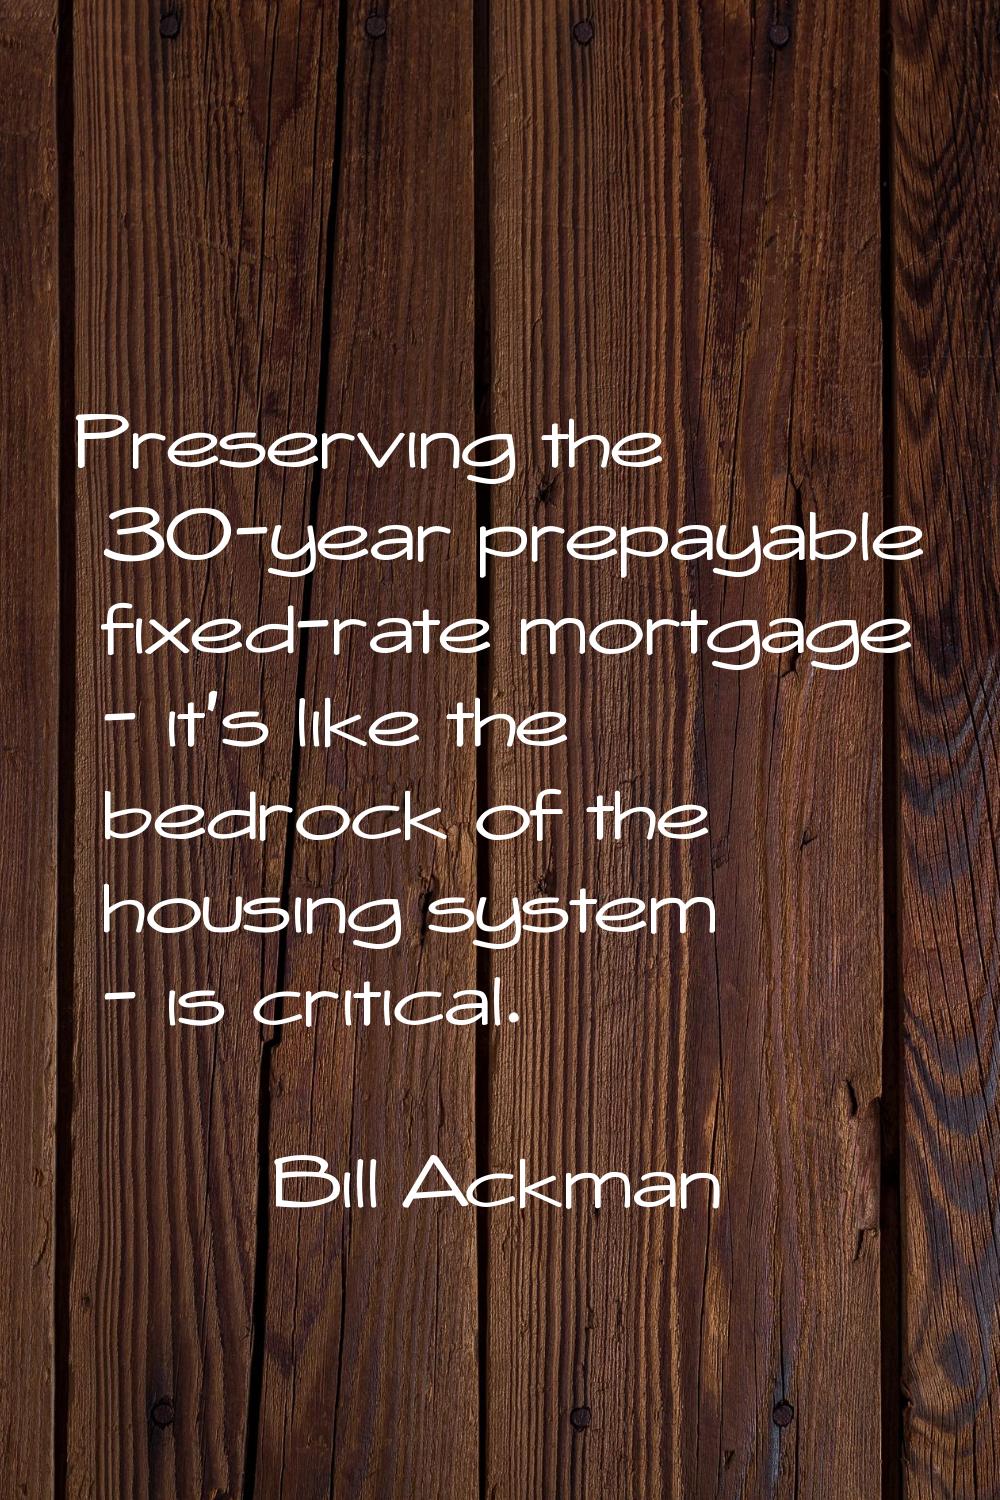 Preserving the 30-year prepayable fixed-rate mortgage - it's like the bedrock of the housing system